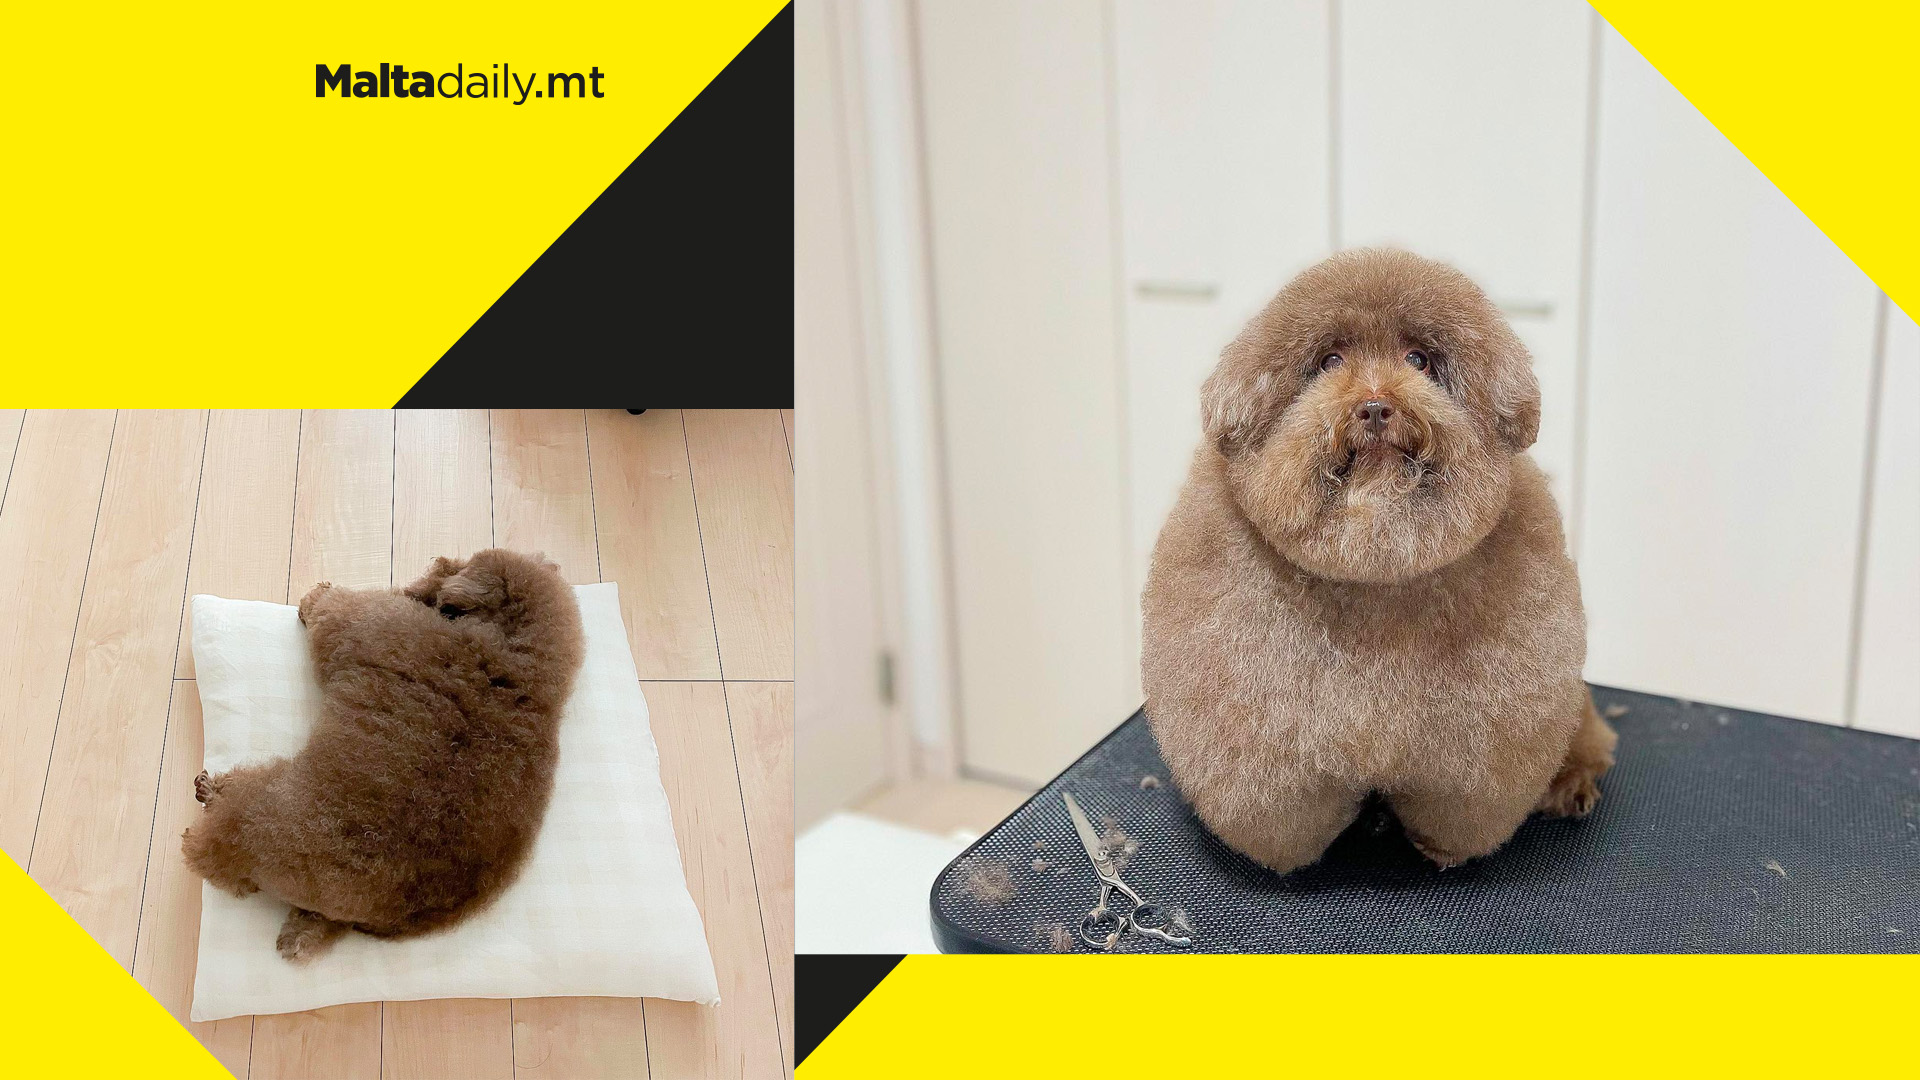 Toy poodle called 'World's Cutest Dog' goes viral for being completely round